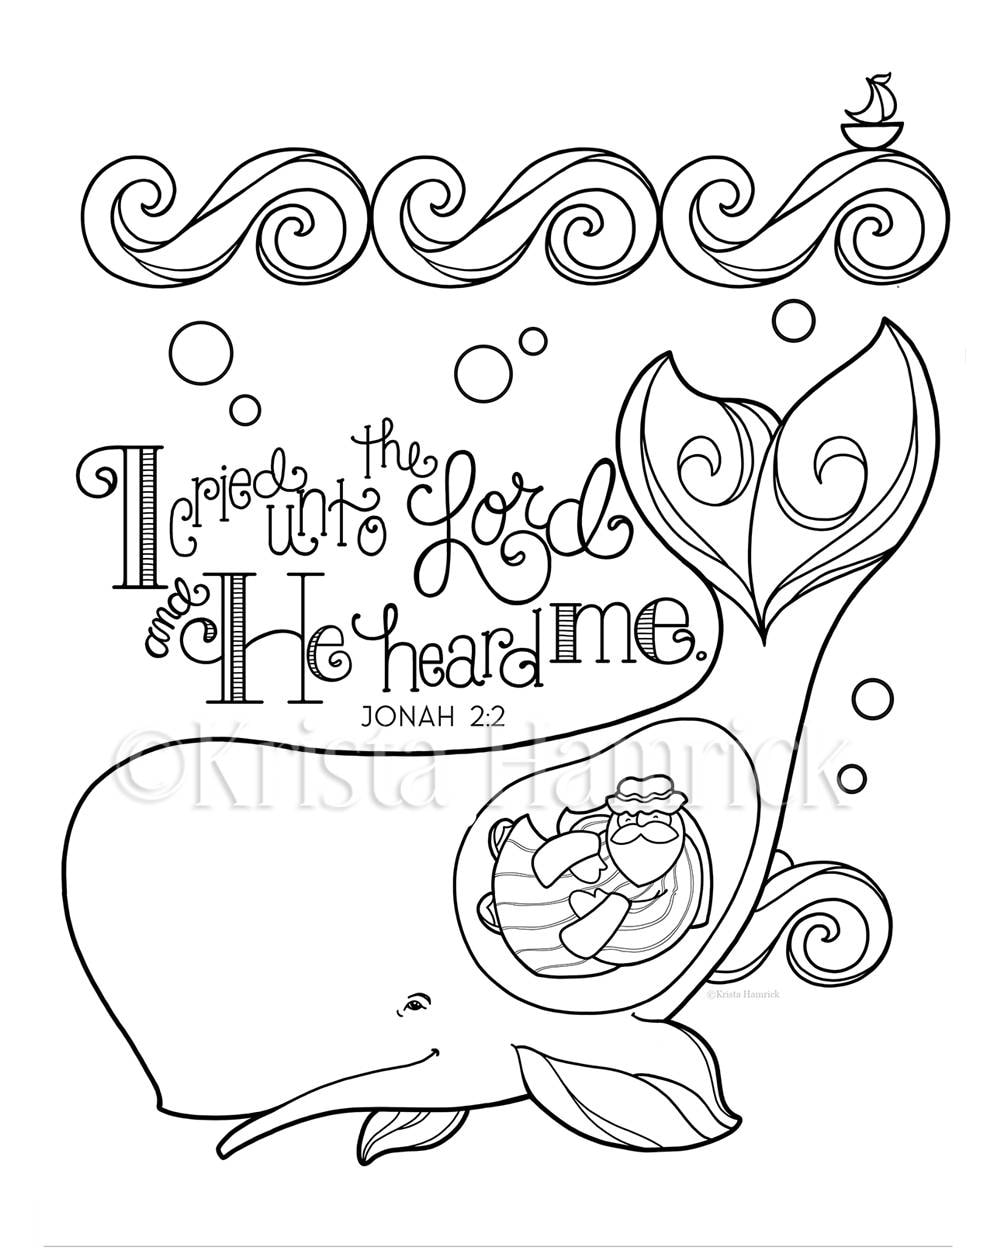 Jonah and the whale coloring page x bible journaling tip